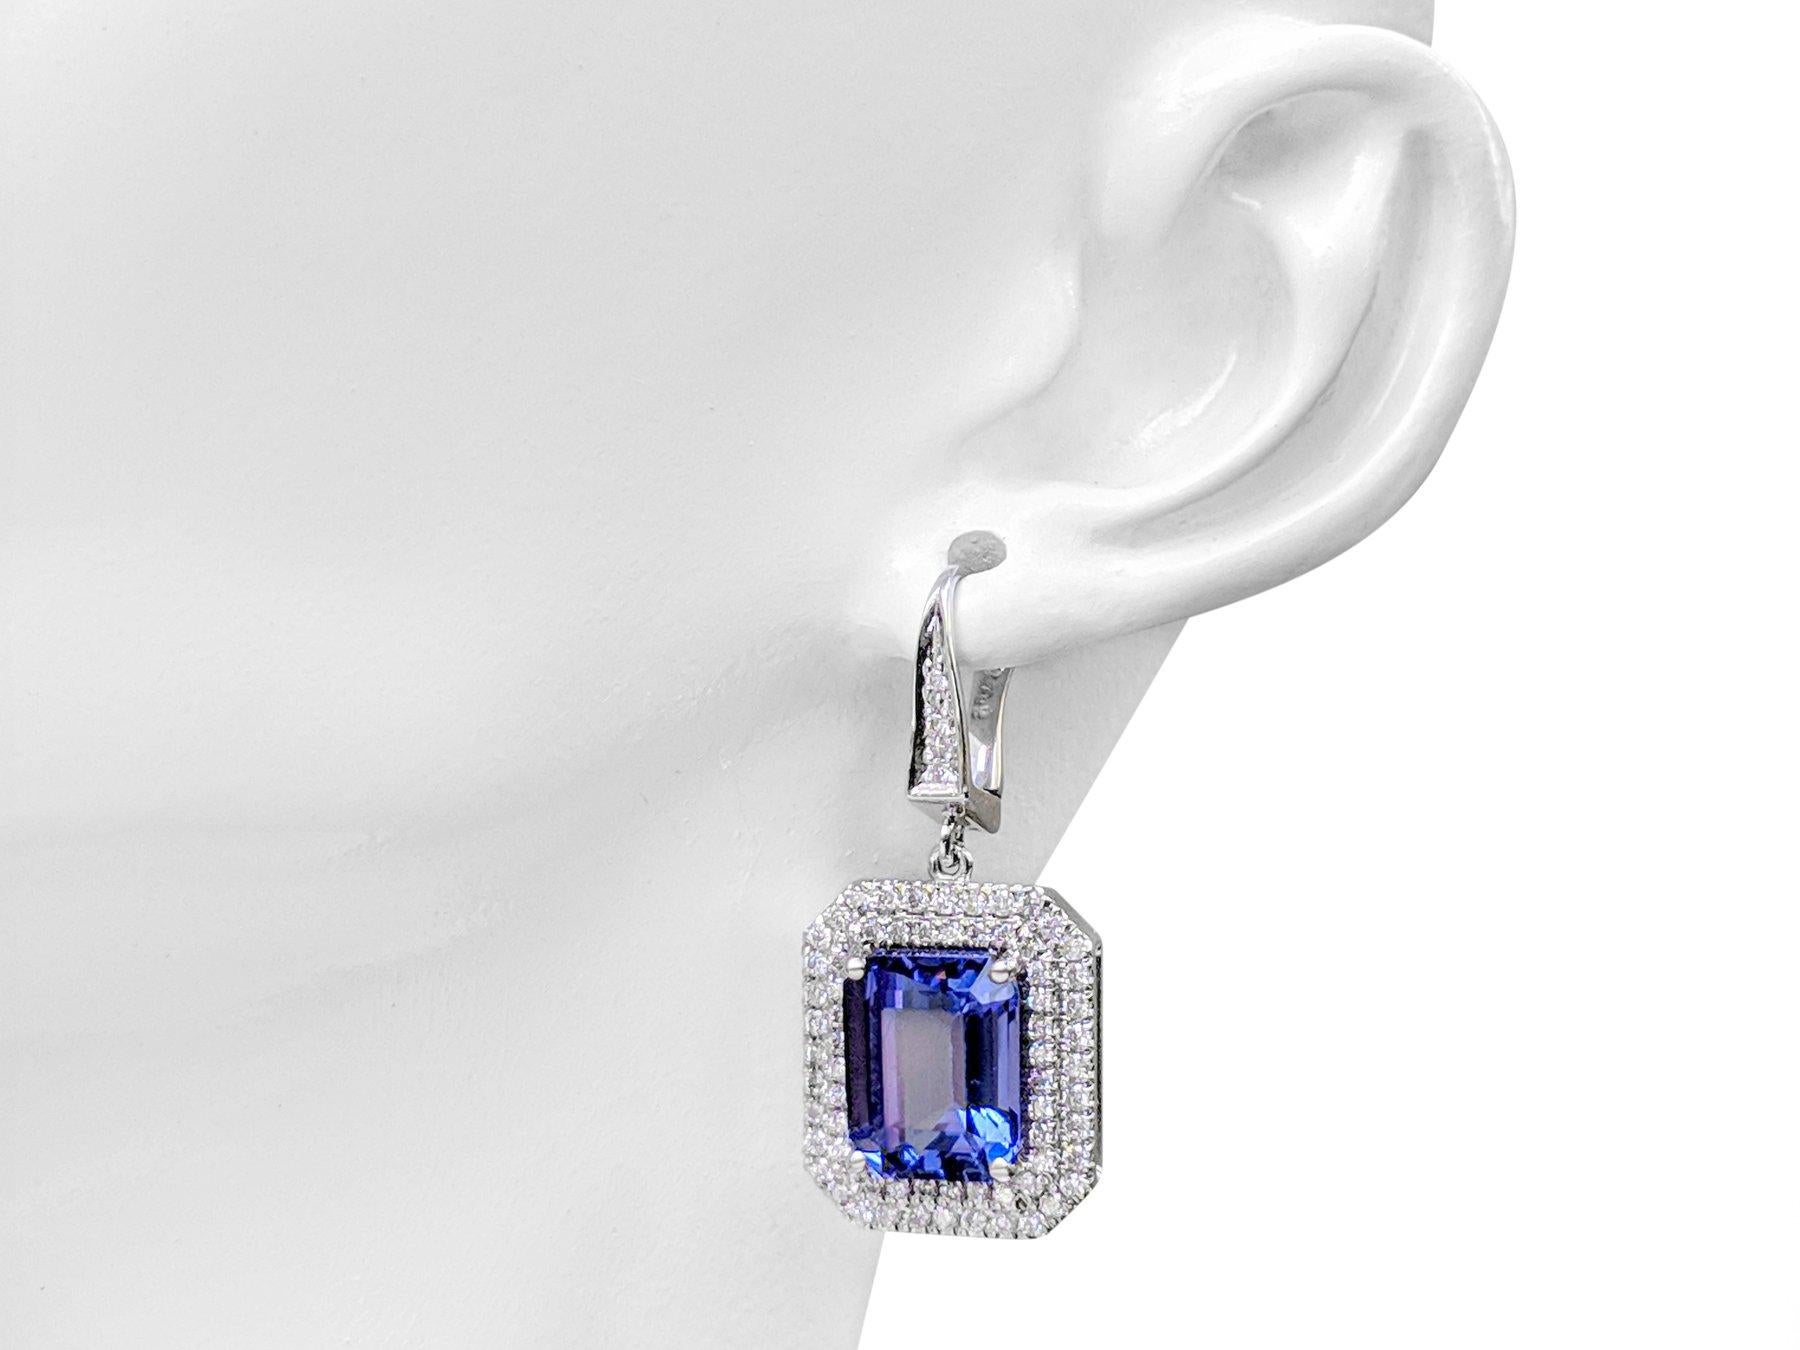 Emerald Cut 10.30 Carat Tanzanite and 1.25Ct Diamonds Halo - 18 kt. White gold - Earrings For Sale